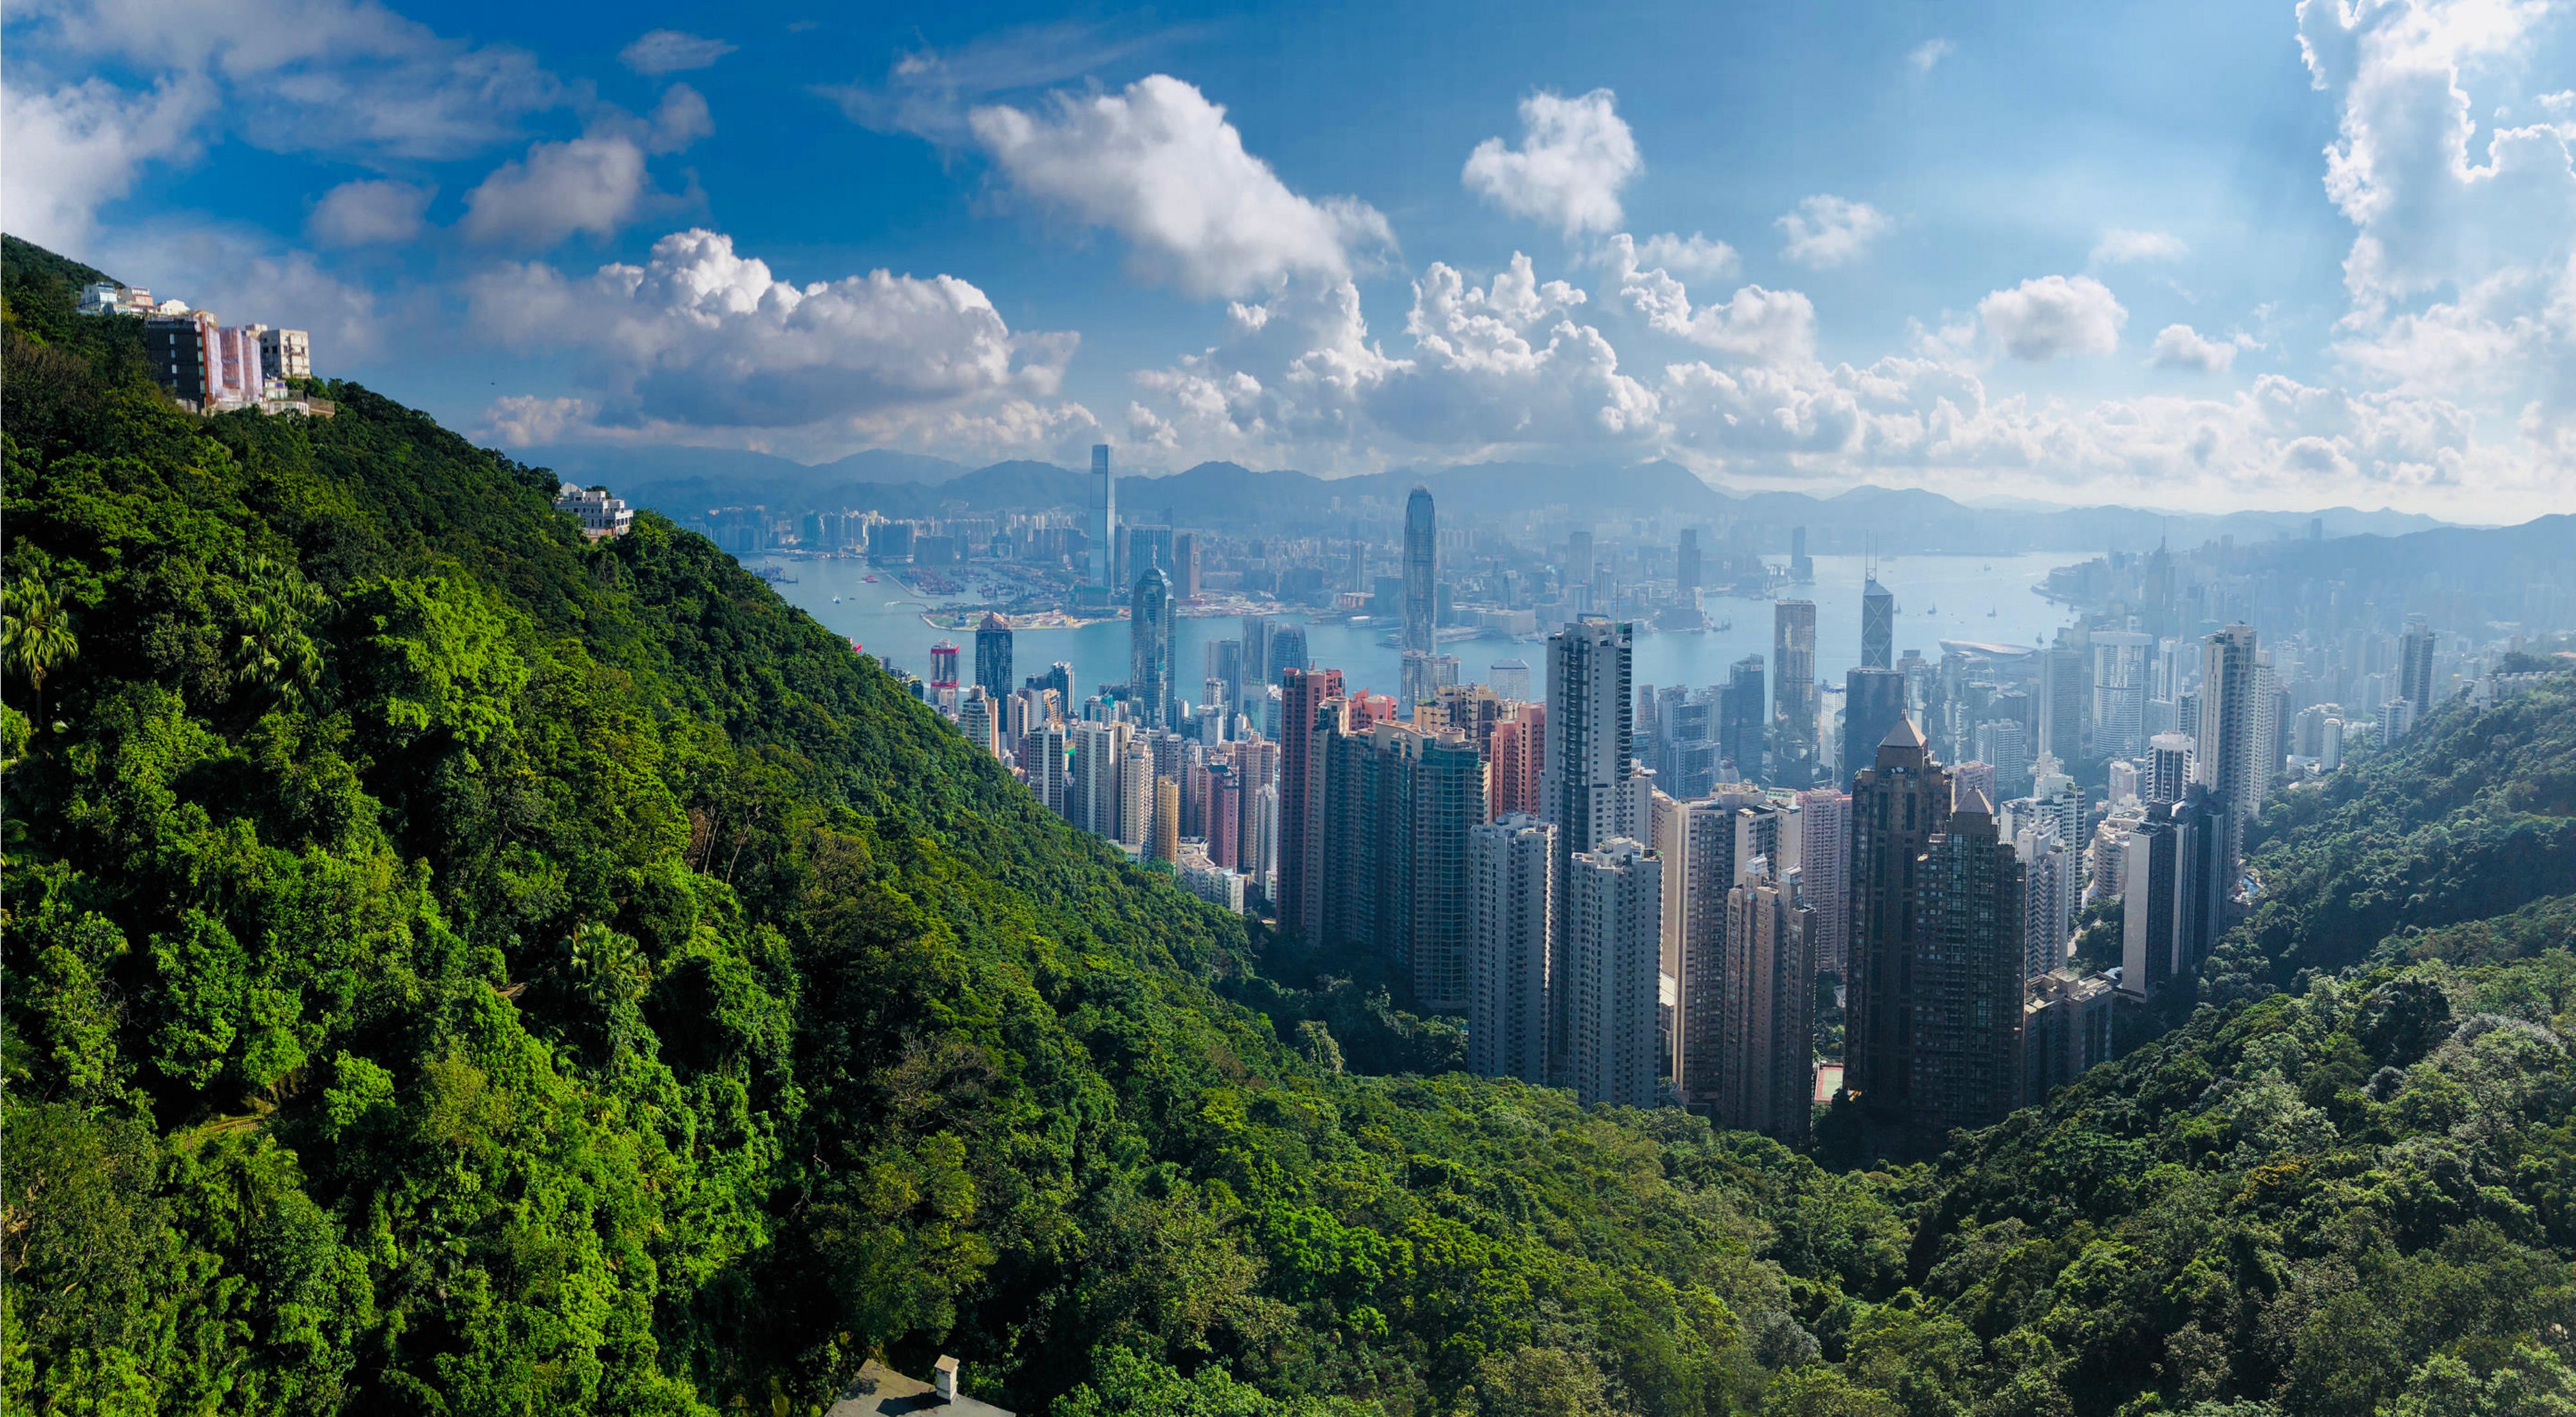 View of skyline of Hong Kong with forested mountain slopes in the foreground.